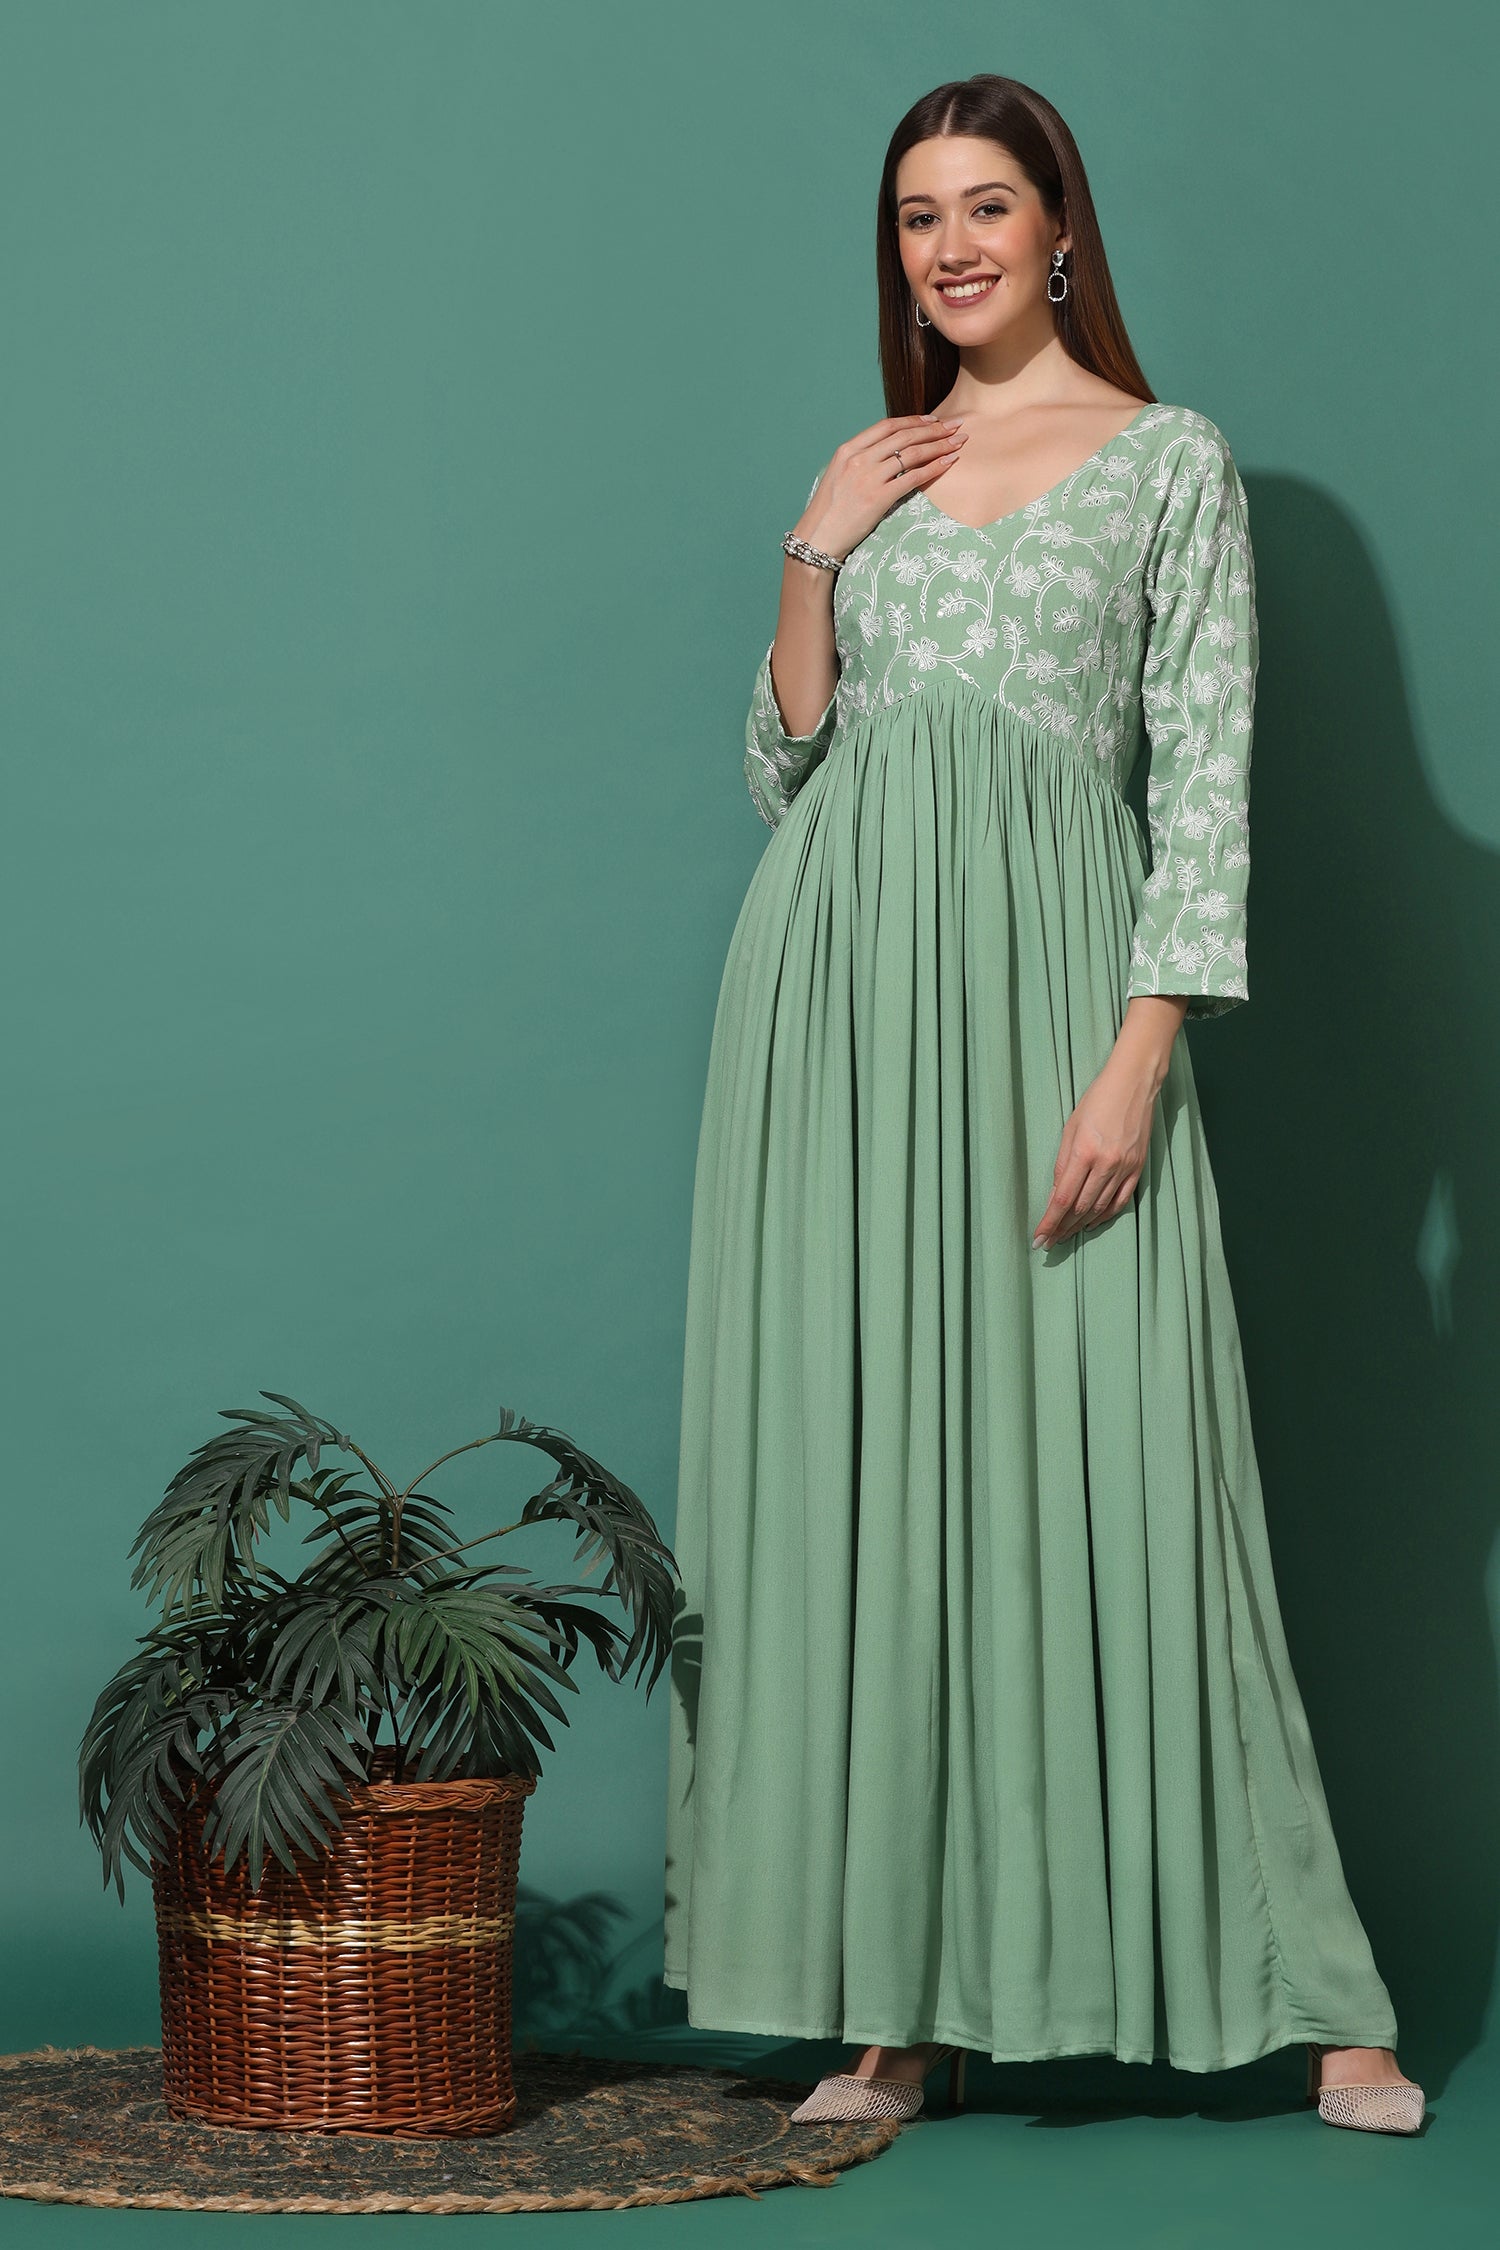 Sets & Dresses | Buy Sets & Dresses Online in India - W for Woman